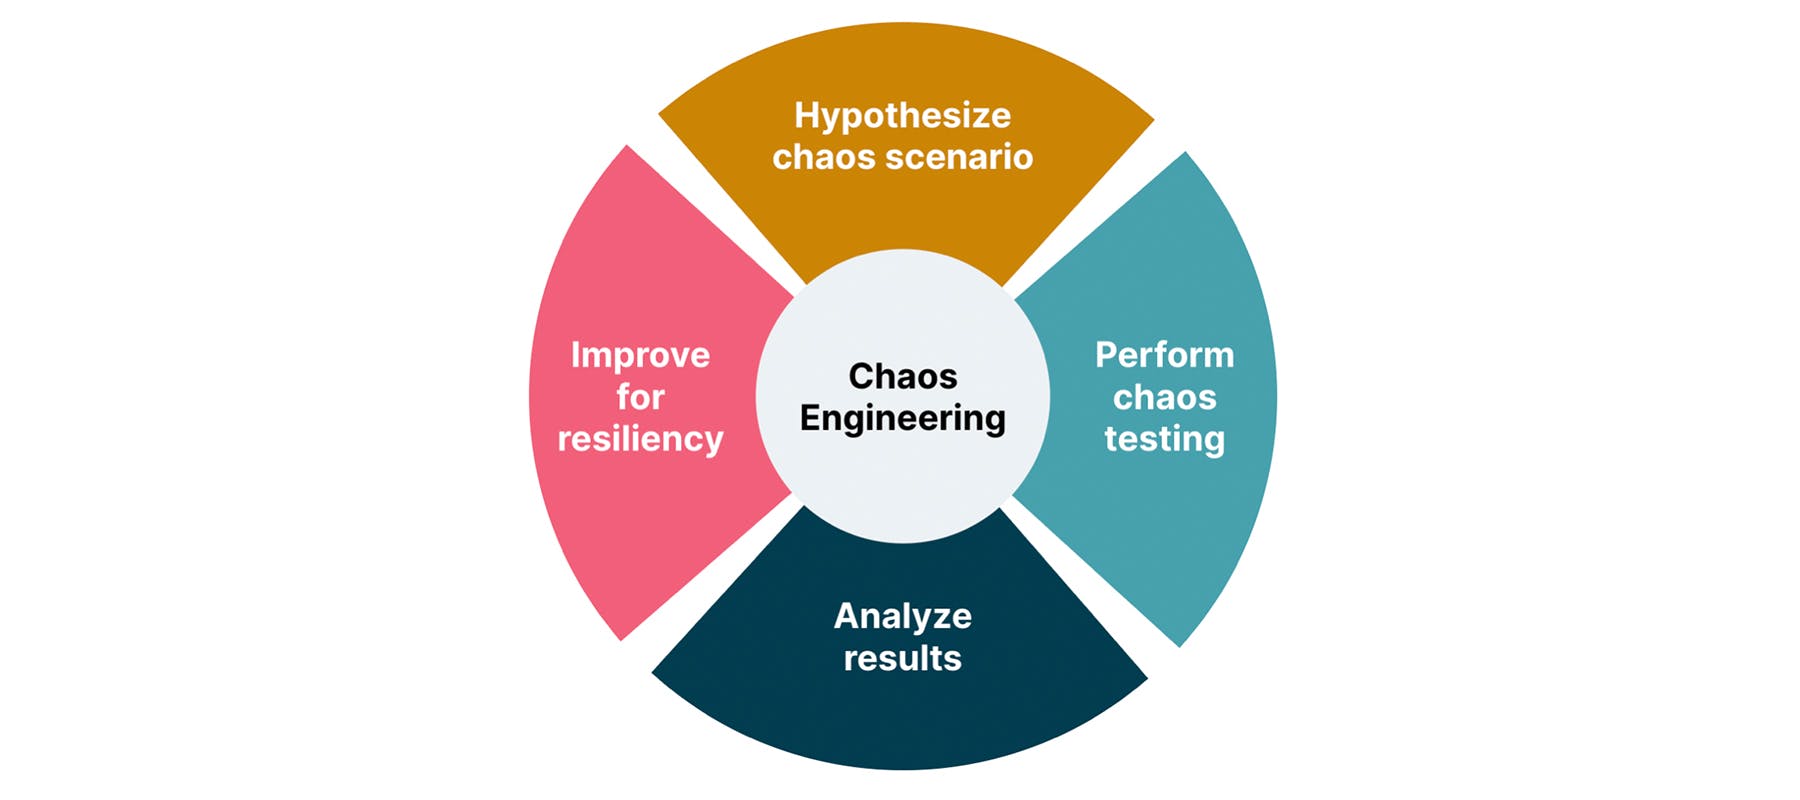 Figure 1 - Chais Engineering | Source: https://www.thoughtworks.com/en-in/insights/blog/agile-enginering-practises/building-resiliency-chaos-engineering